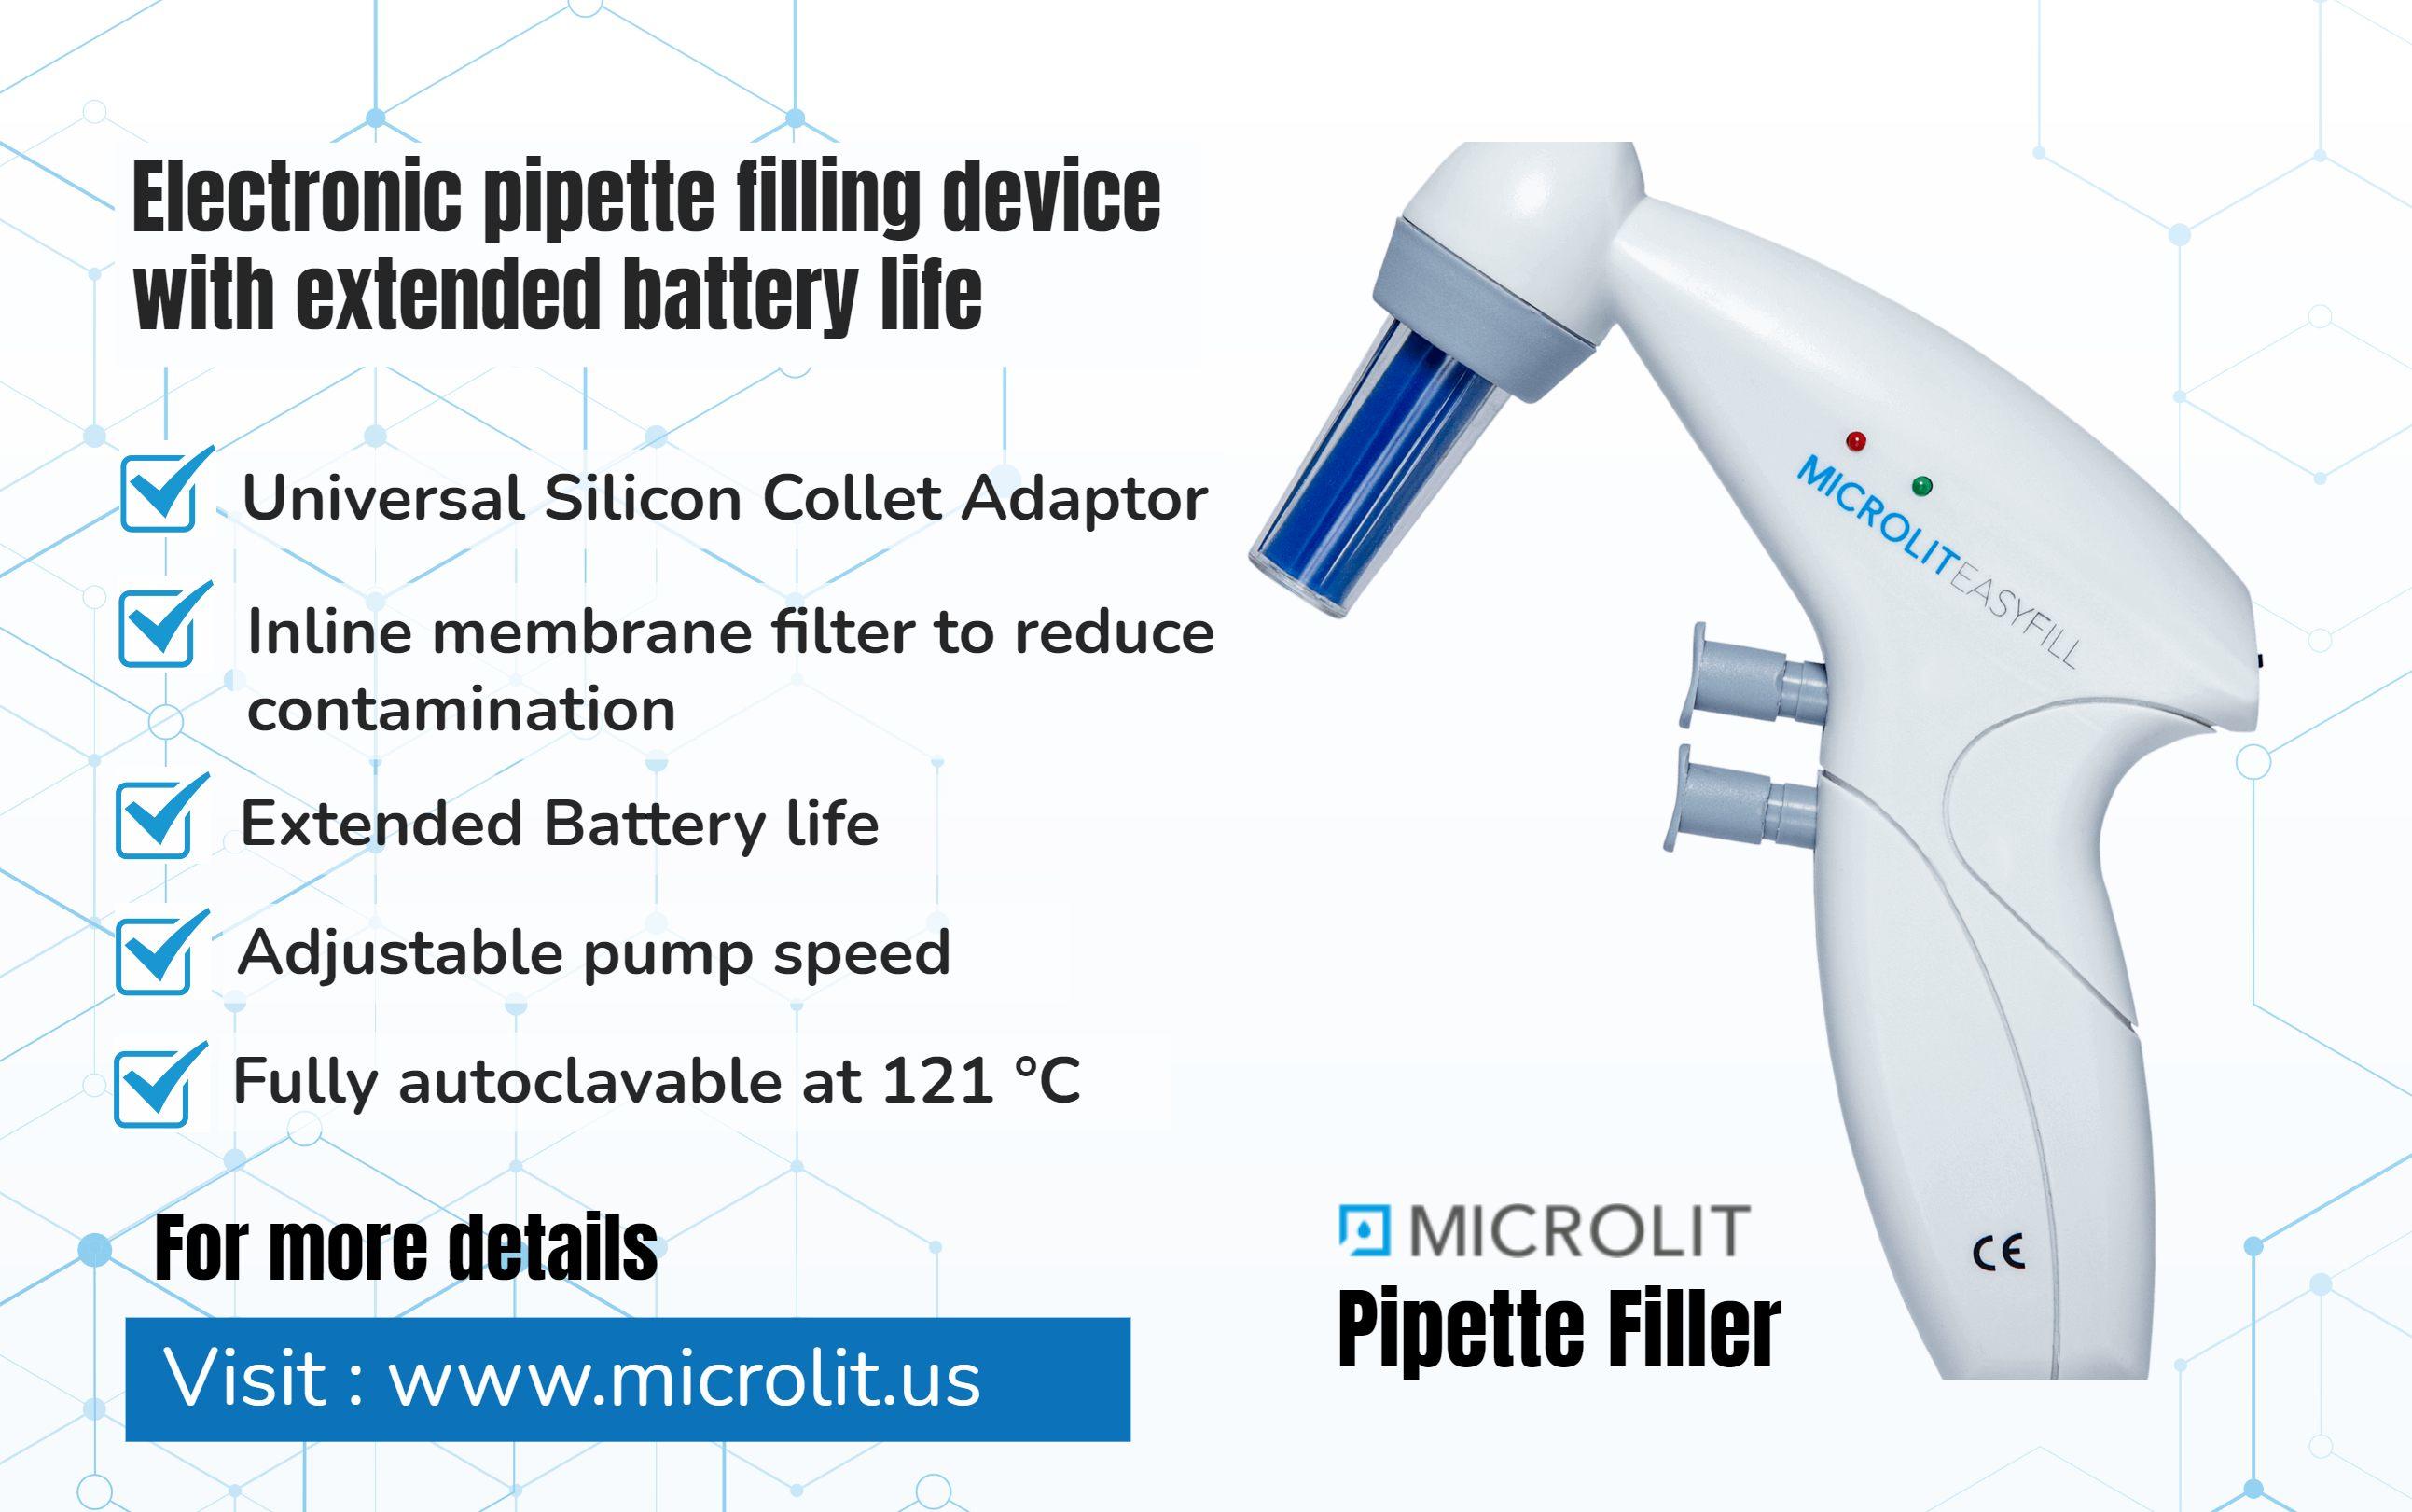 Image - Microlit offers an innovative Electronic #PipetteFiller with extended battery life that helps to hold #pipett...